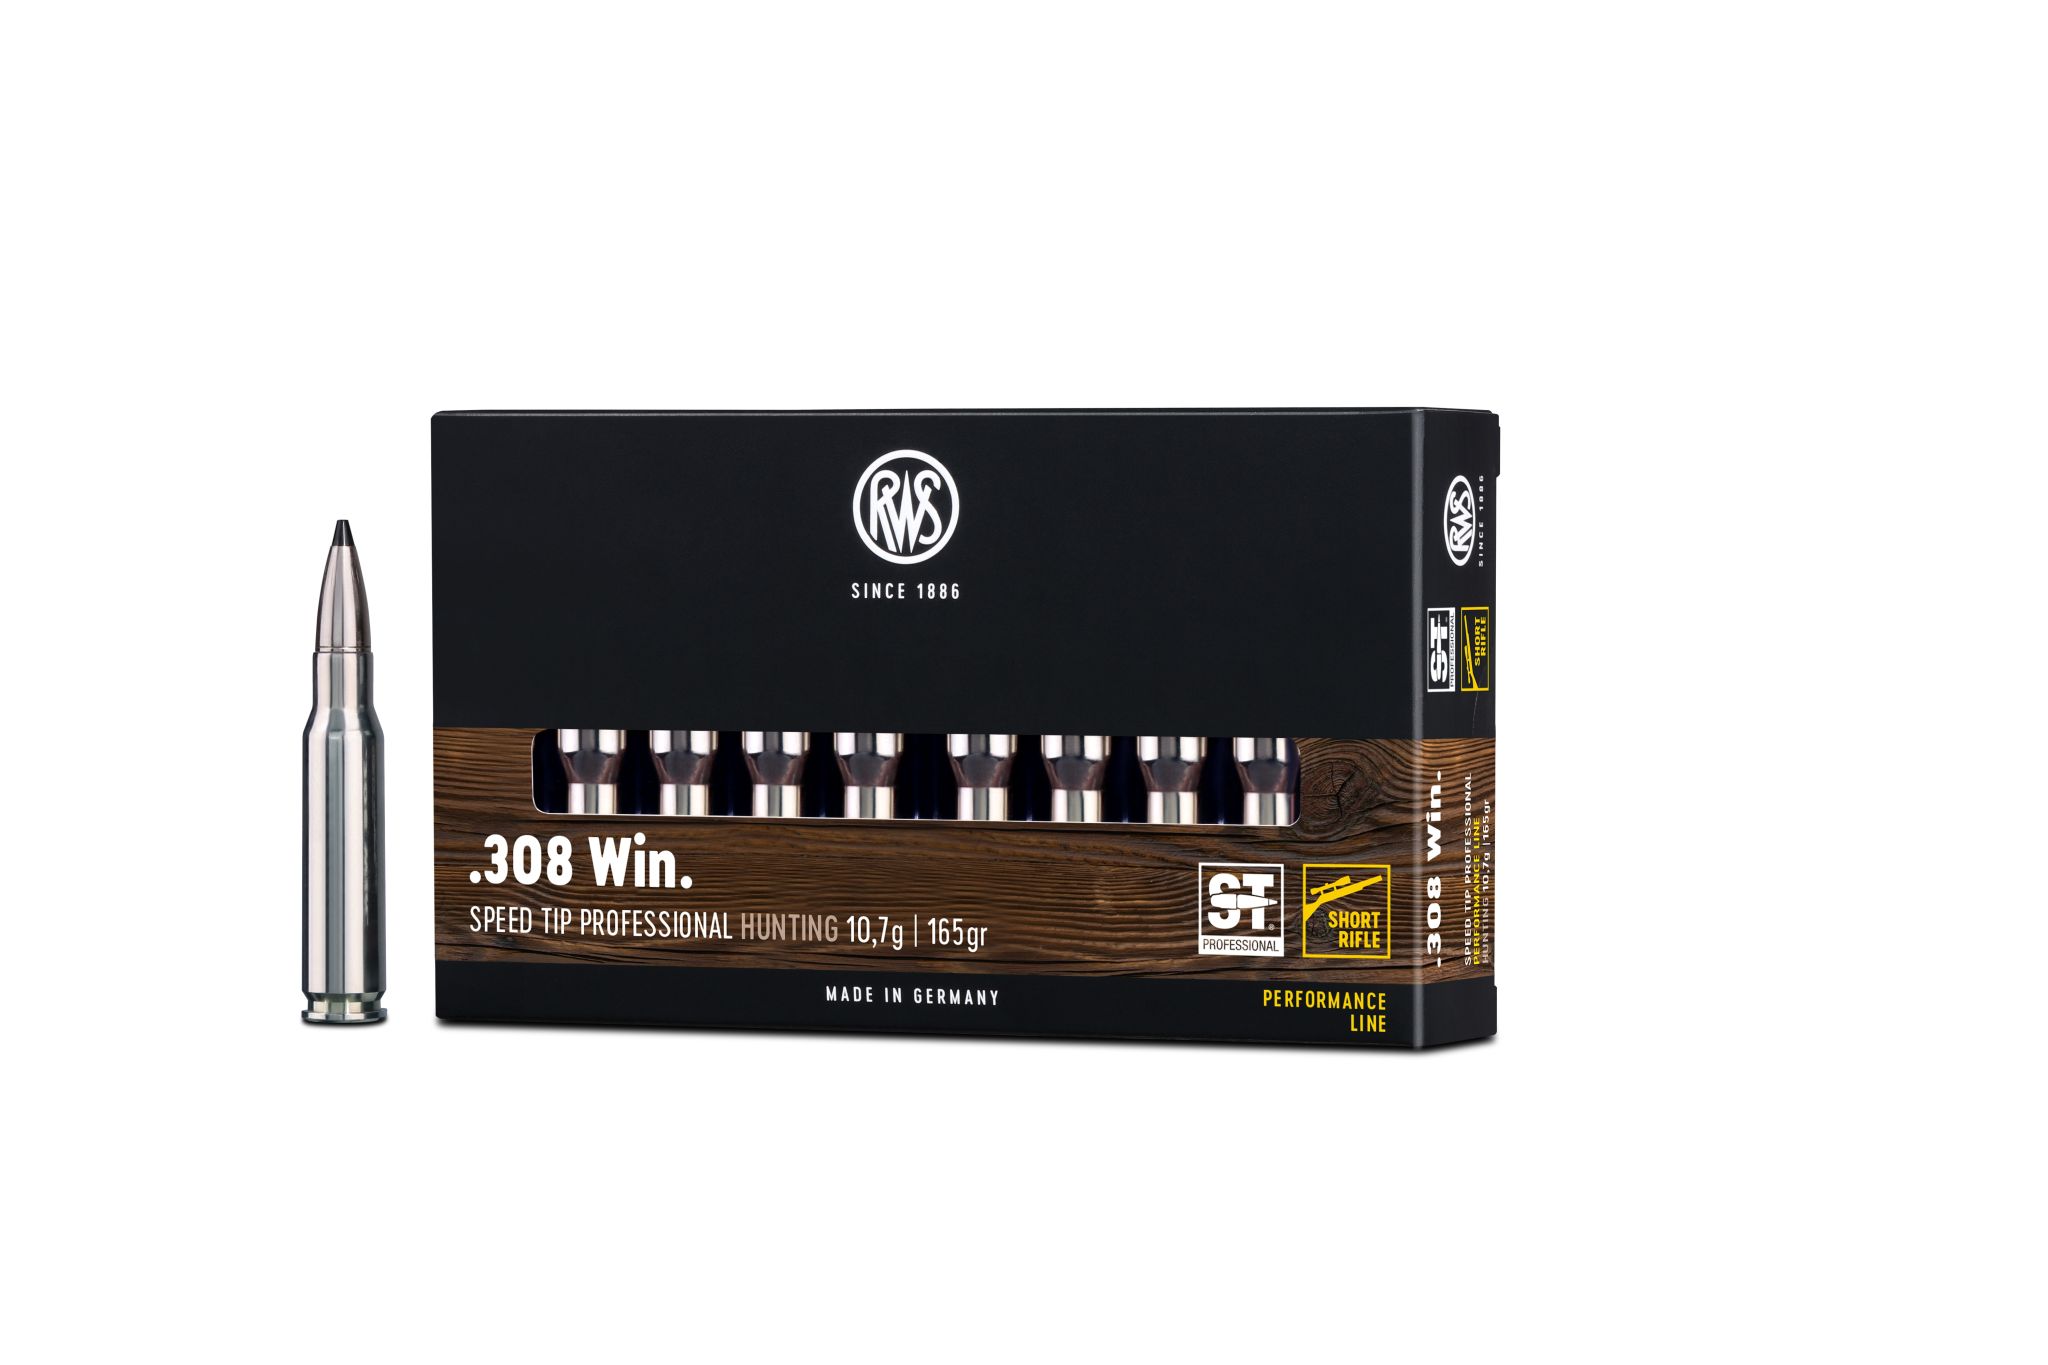 RWS .308 Win. Speed Tip Pro 10,7g ShortRifle